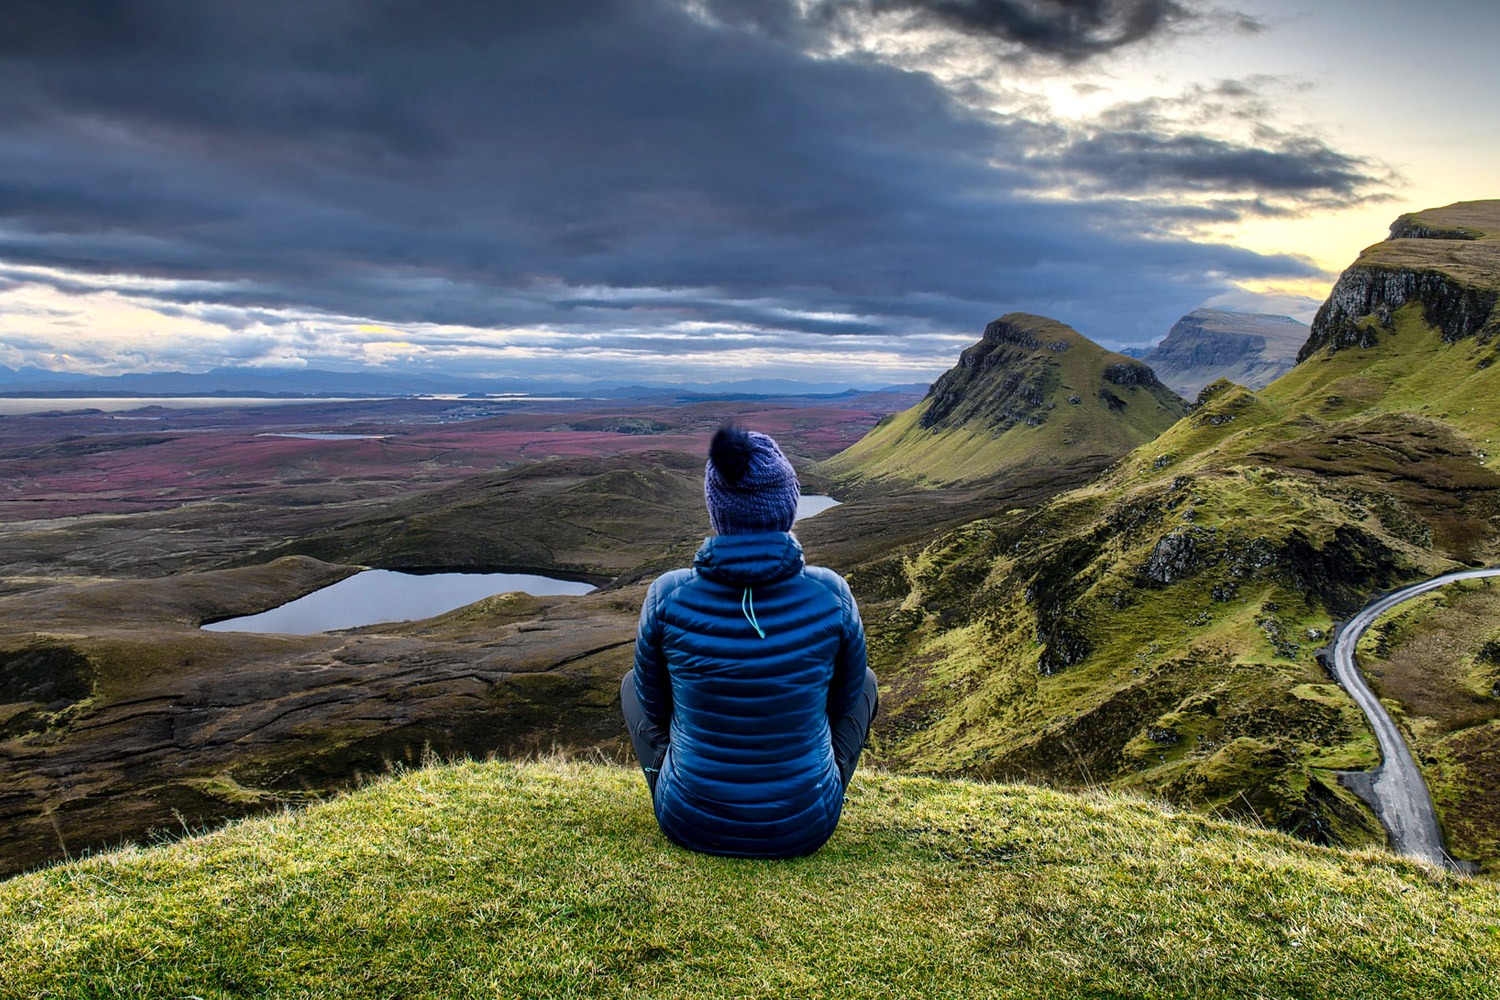 Epic vista of the Scottish Highlands mountains with a woman sitting looking at the view in the foreground. Discover Your Scottish Roots on a Custom Ancestry Tour.